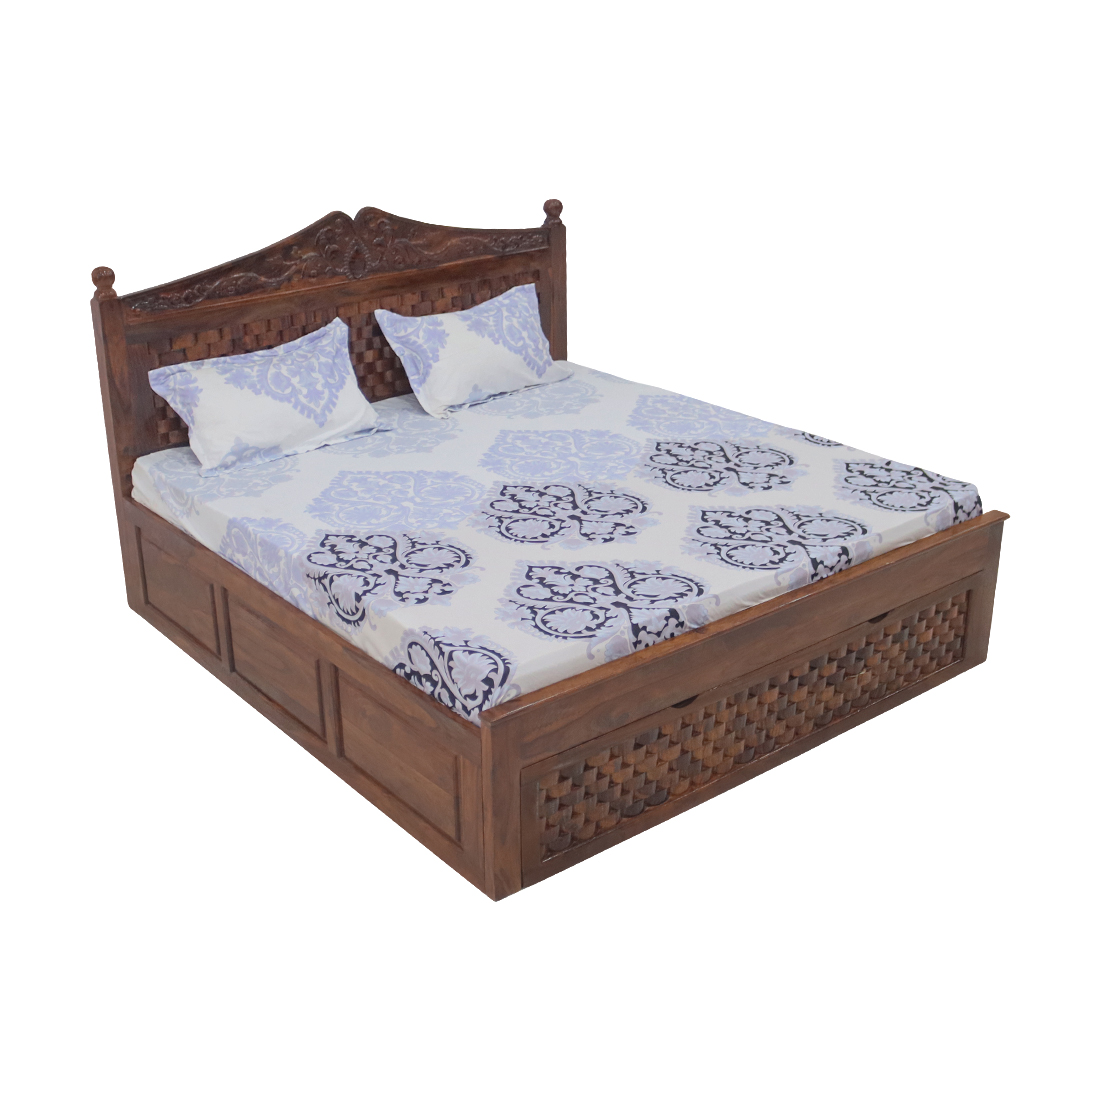 AARAM Solid Wood jali Design Bed with Box Storage